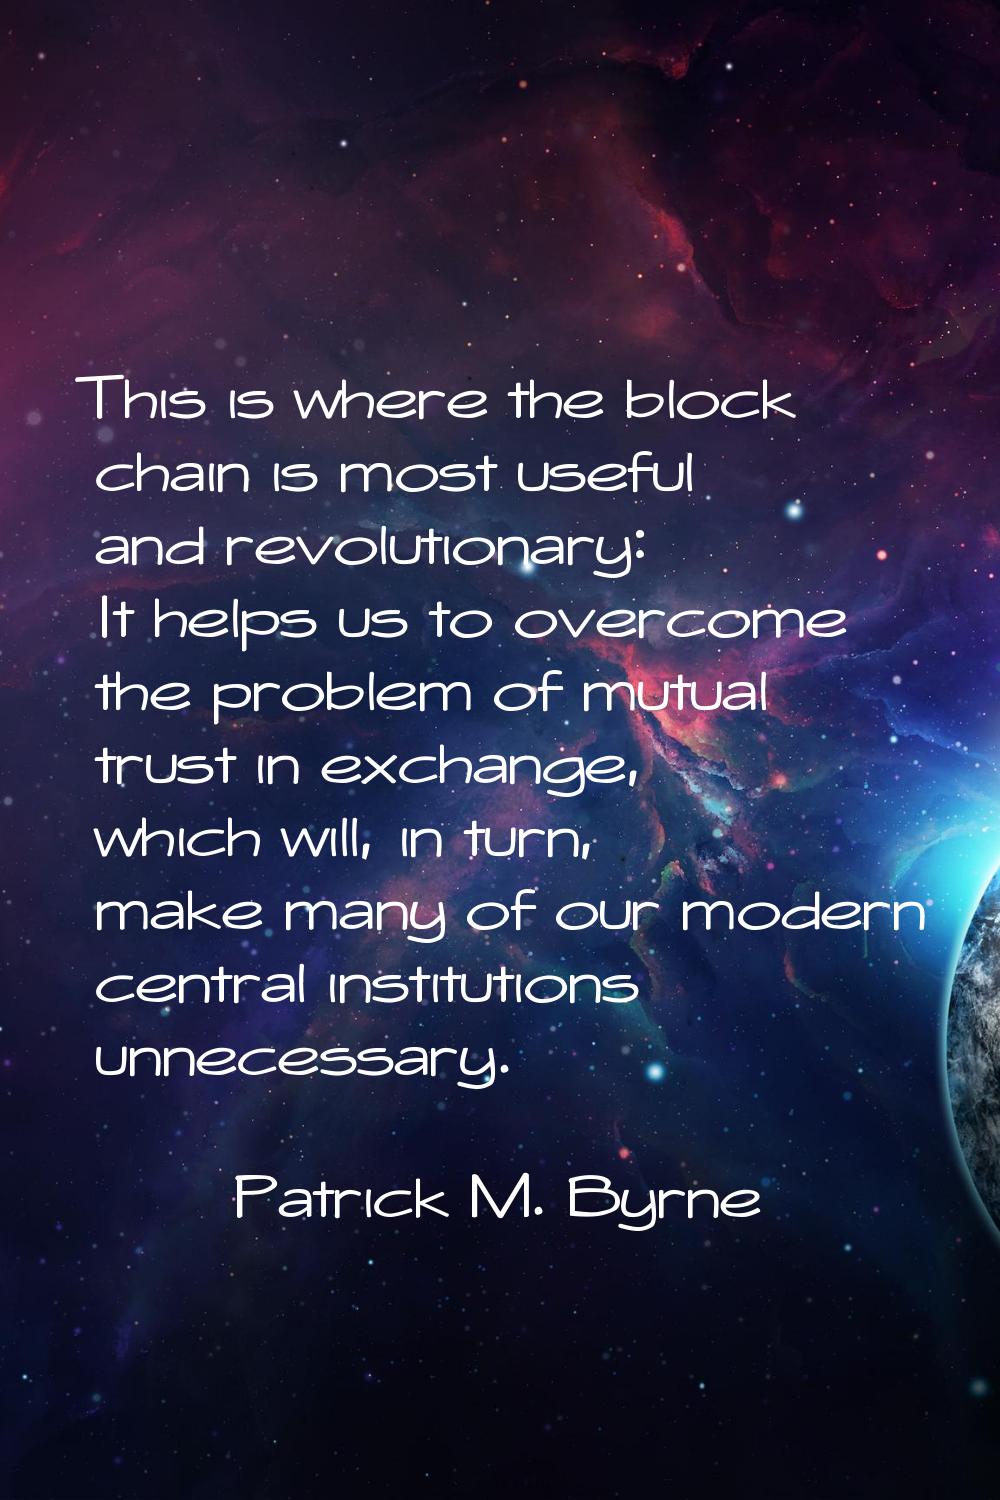 This is where the block chain is most useful and revolutionary: It helps us to overcome the problem